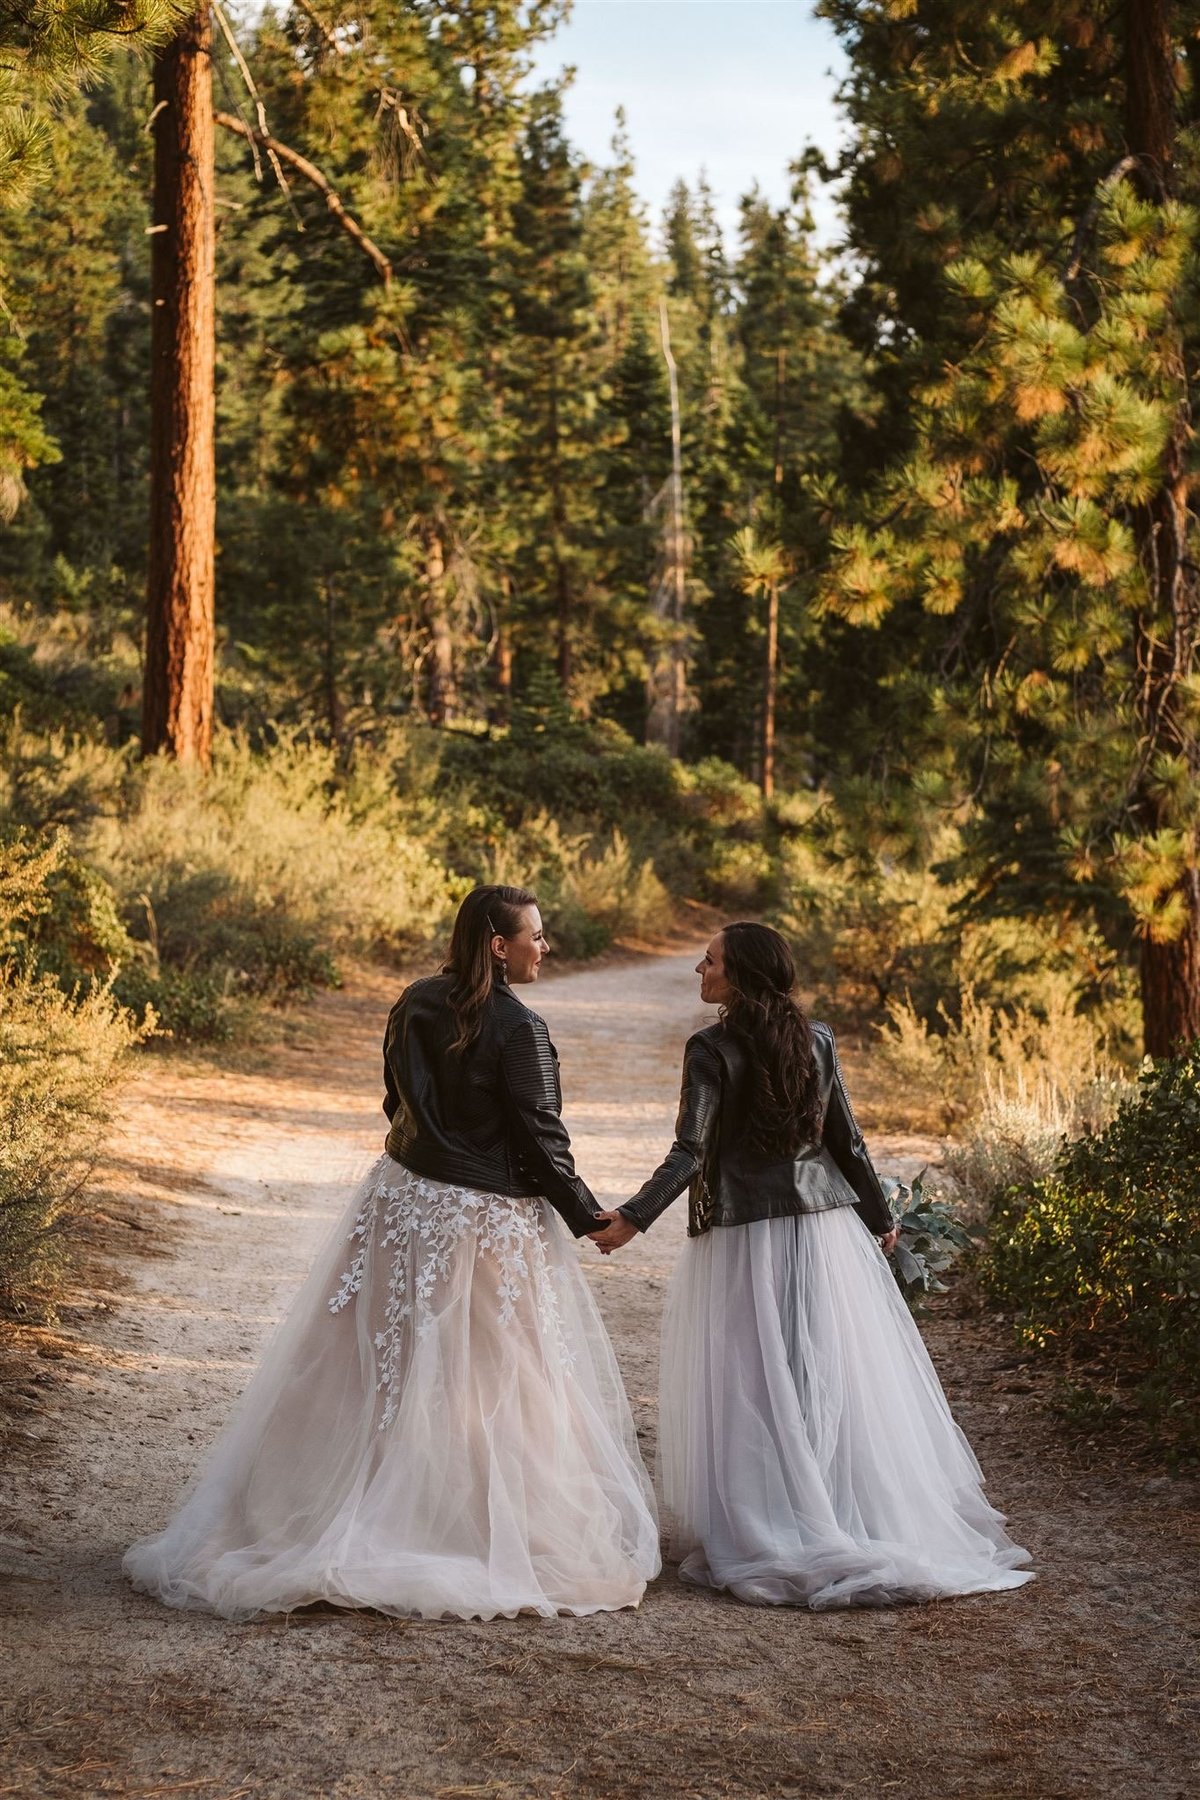 Two brides taking a stroll in the forest